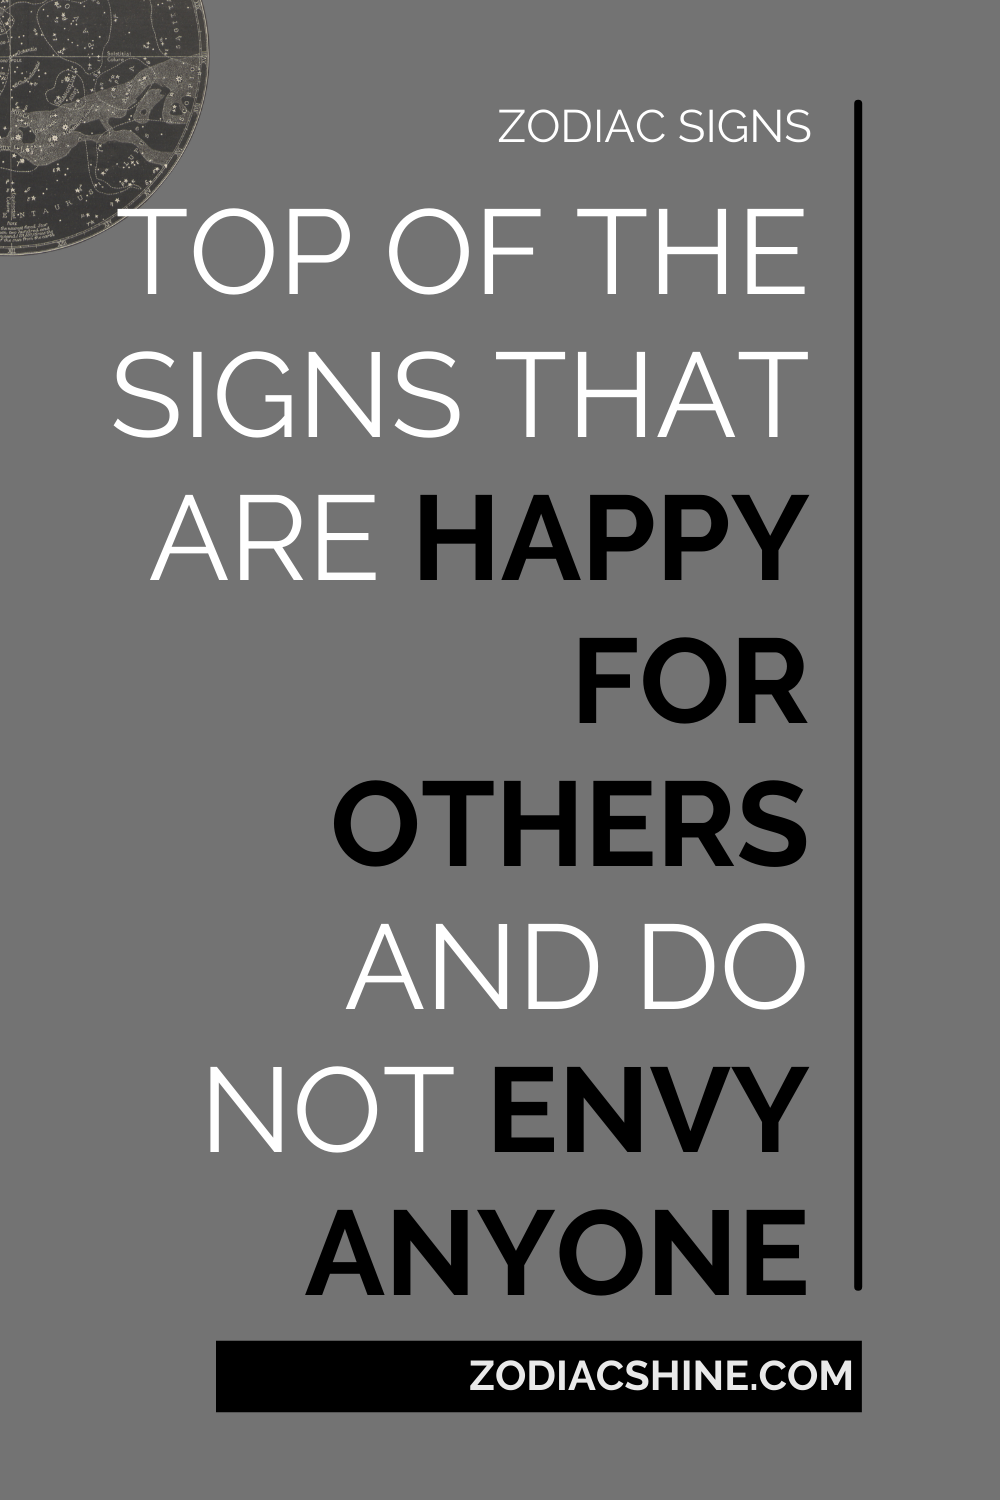 Top Of The Signs That Are Happy For Others And Do Not Envy Anyone